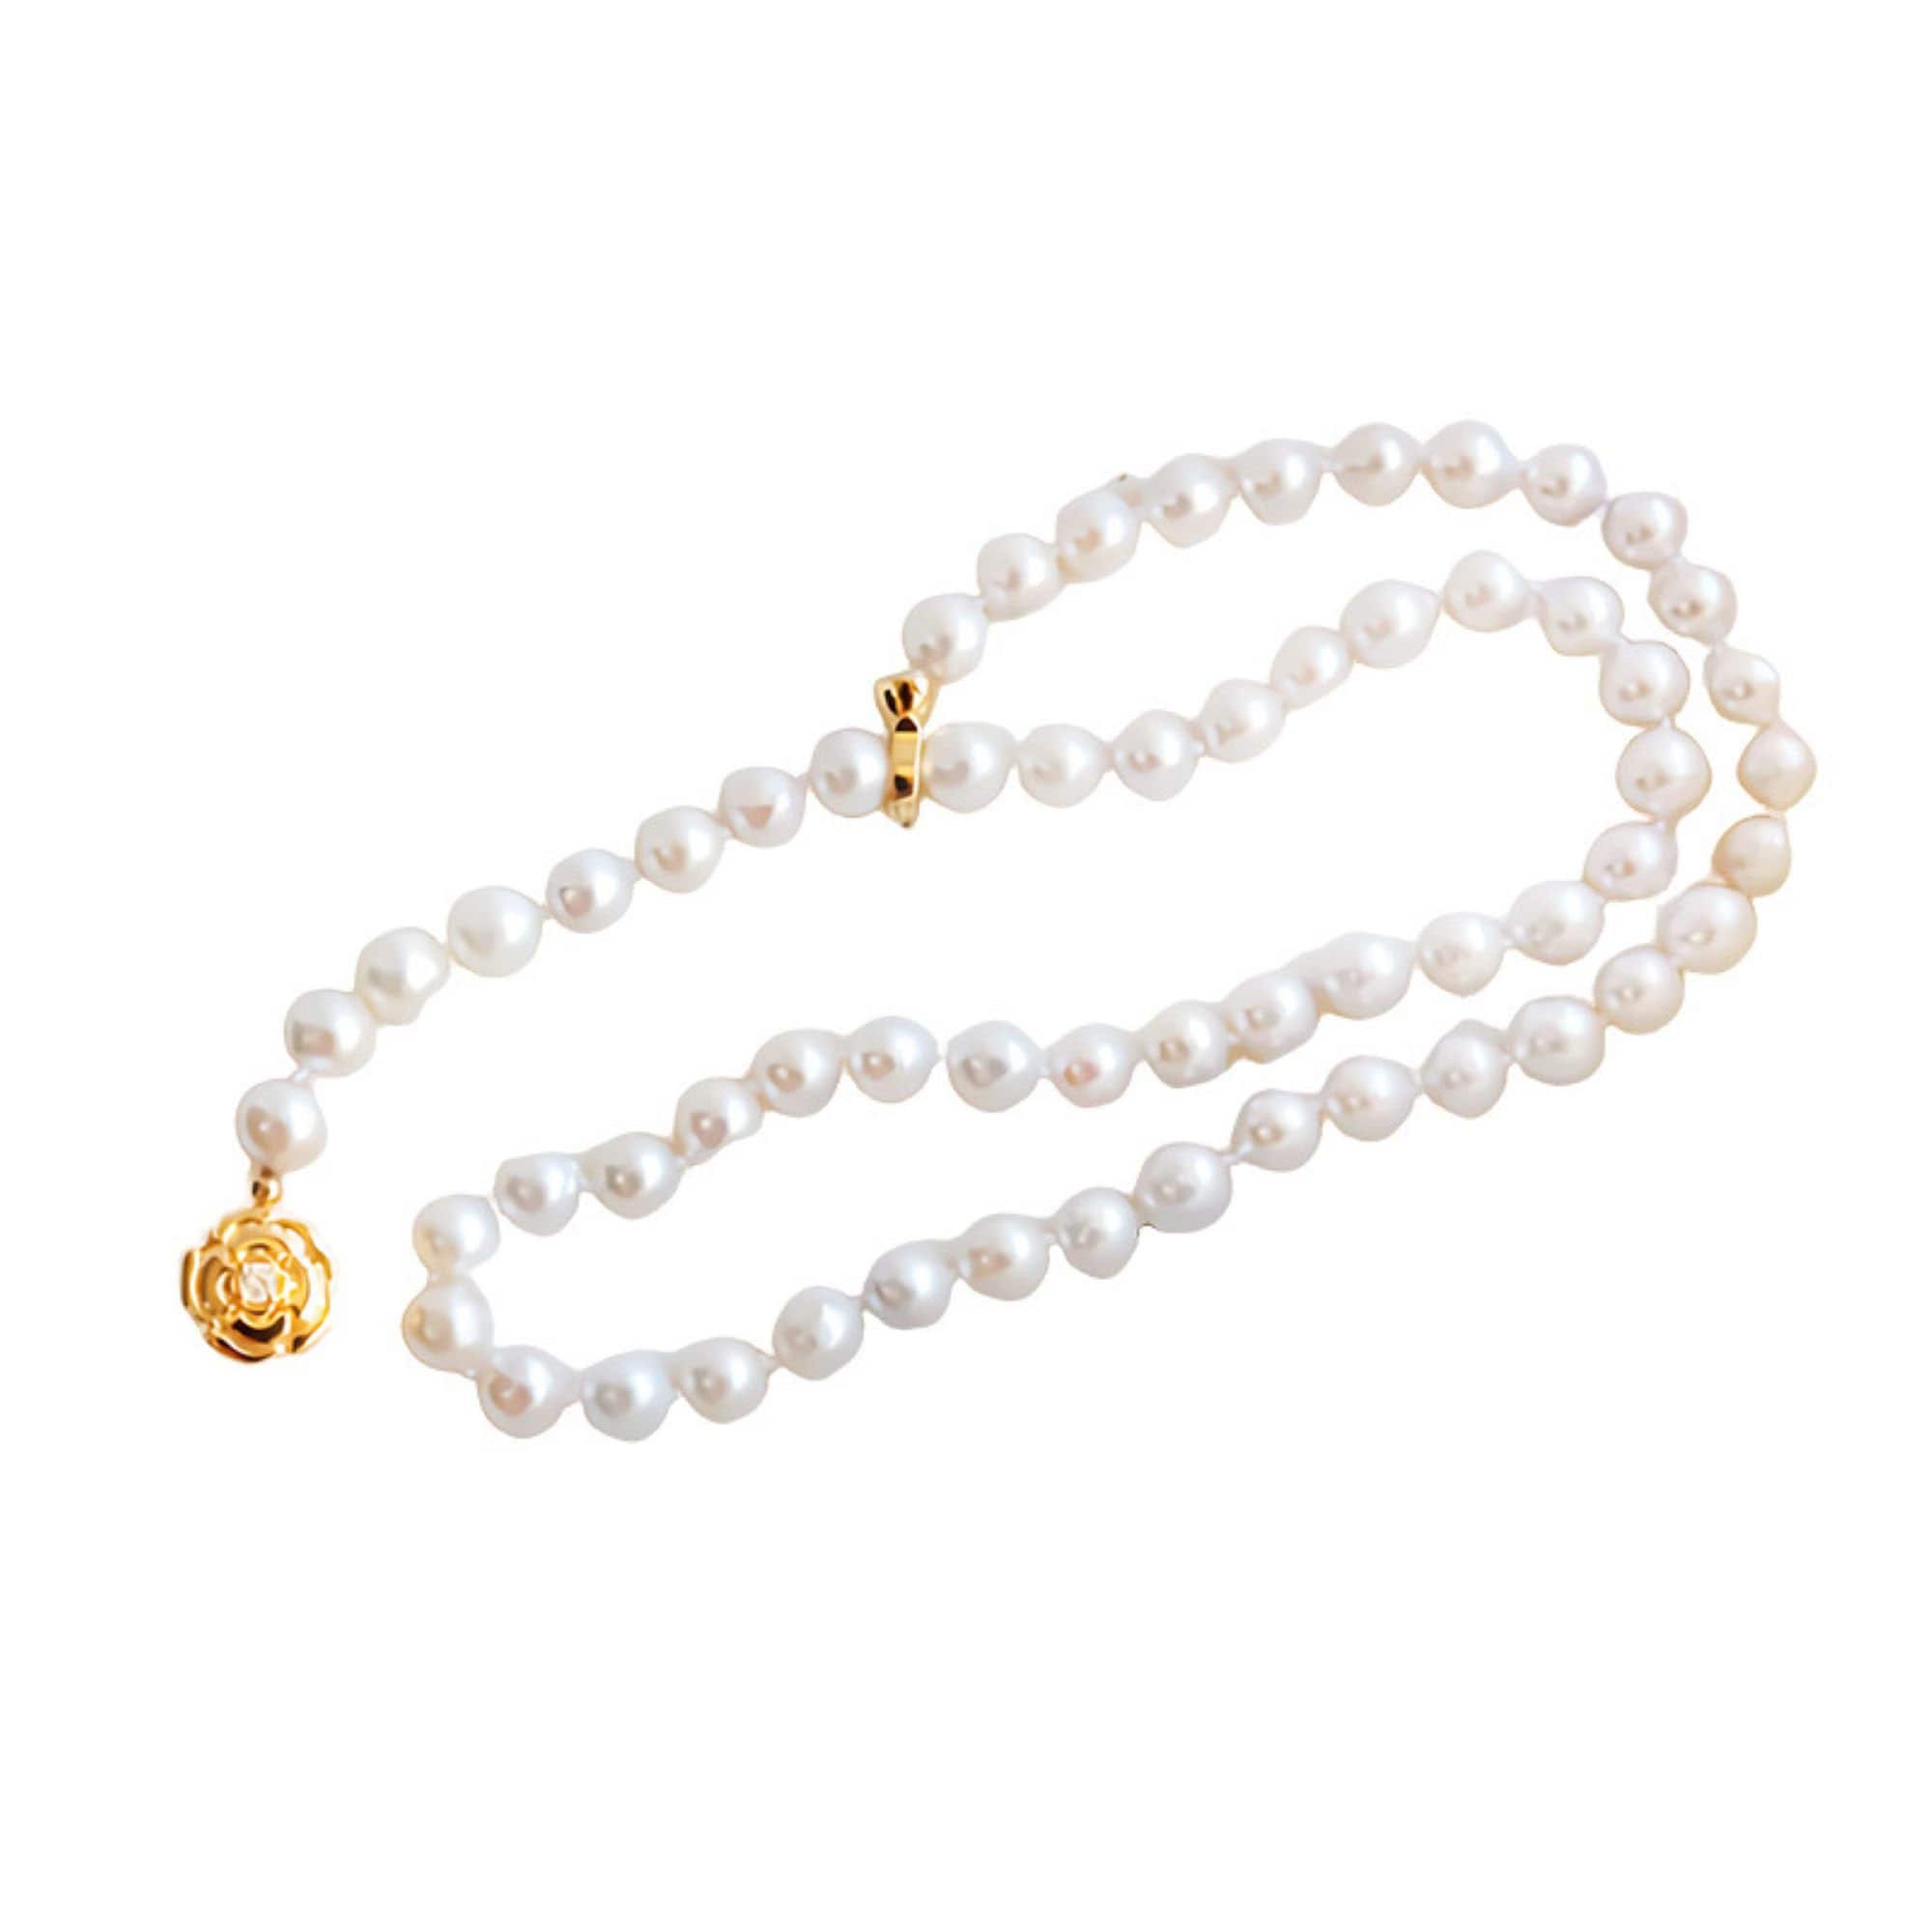 women-Necklace-freshwater pearl-gift for her